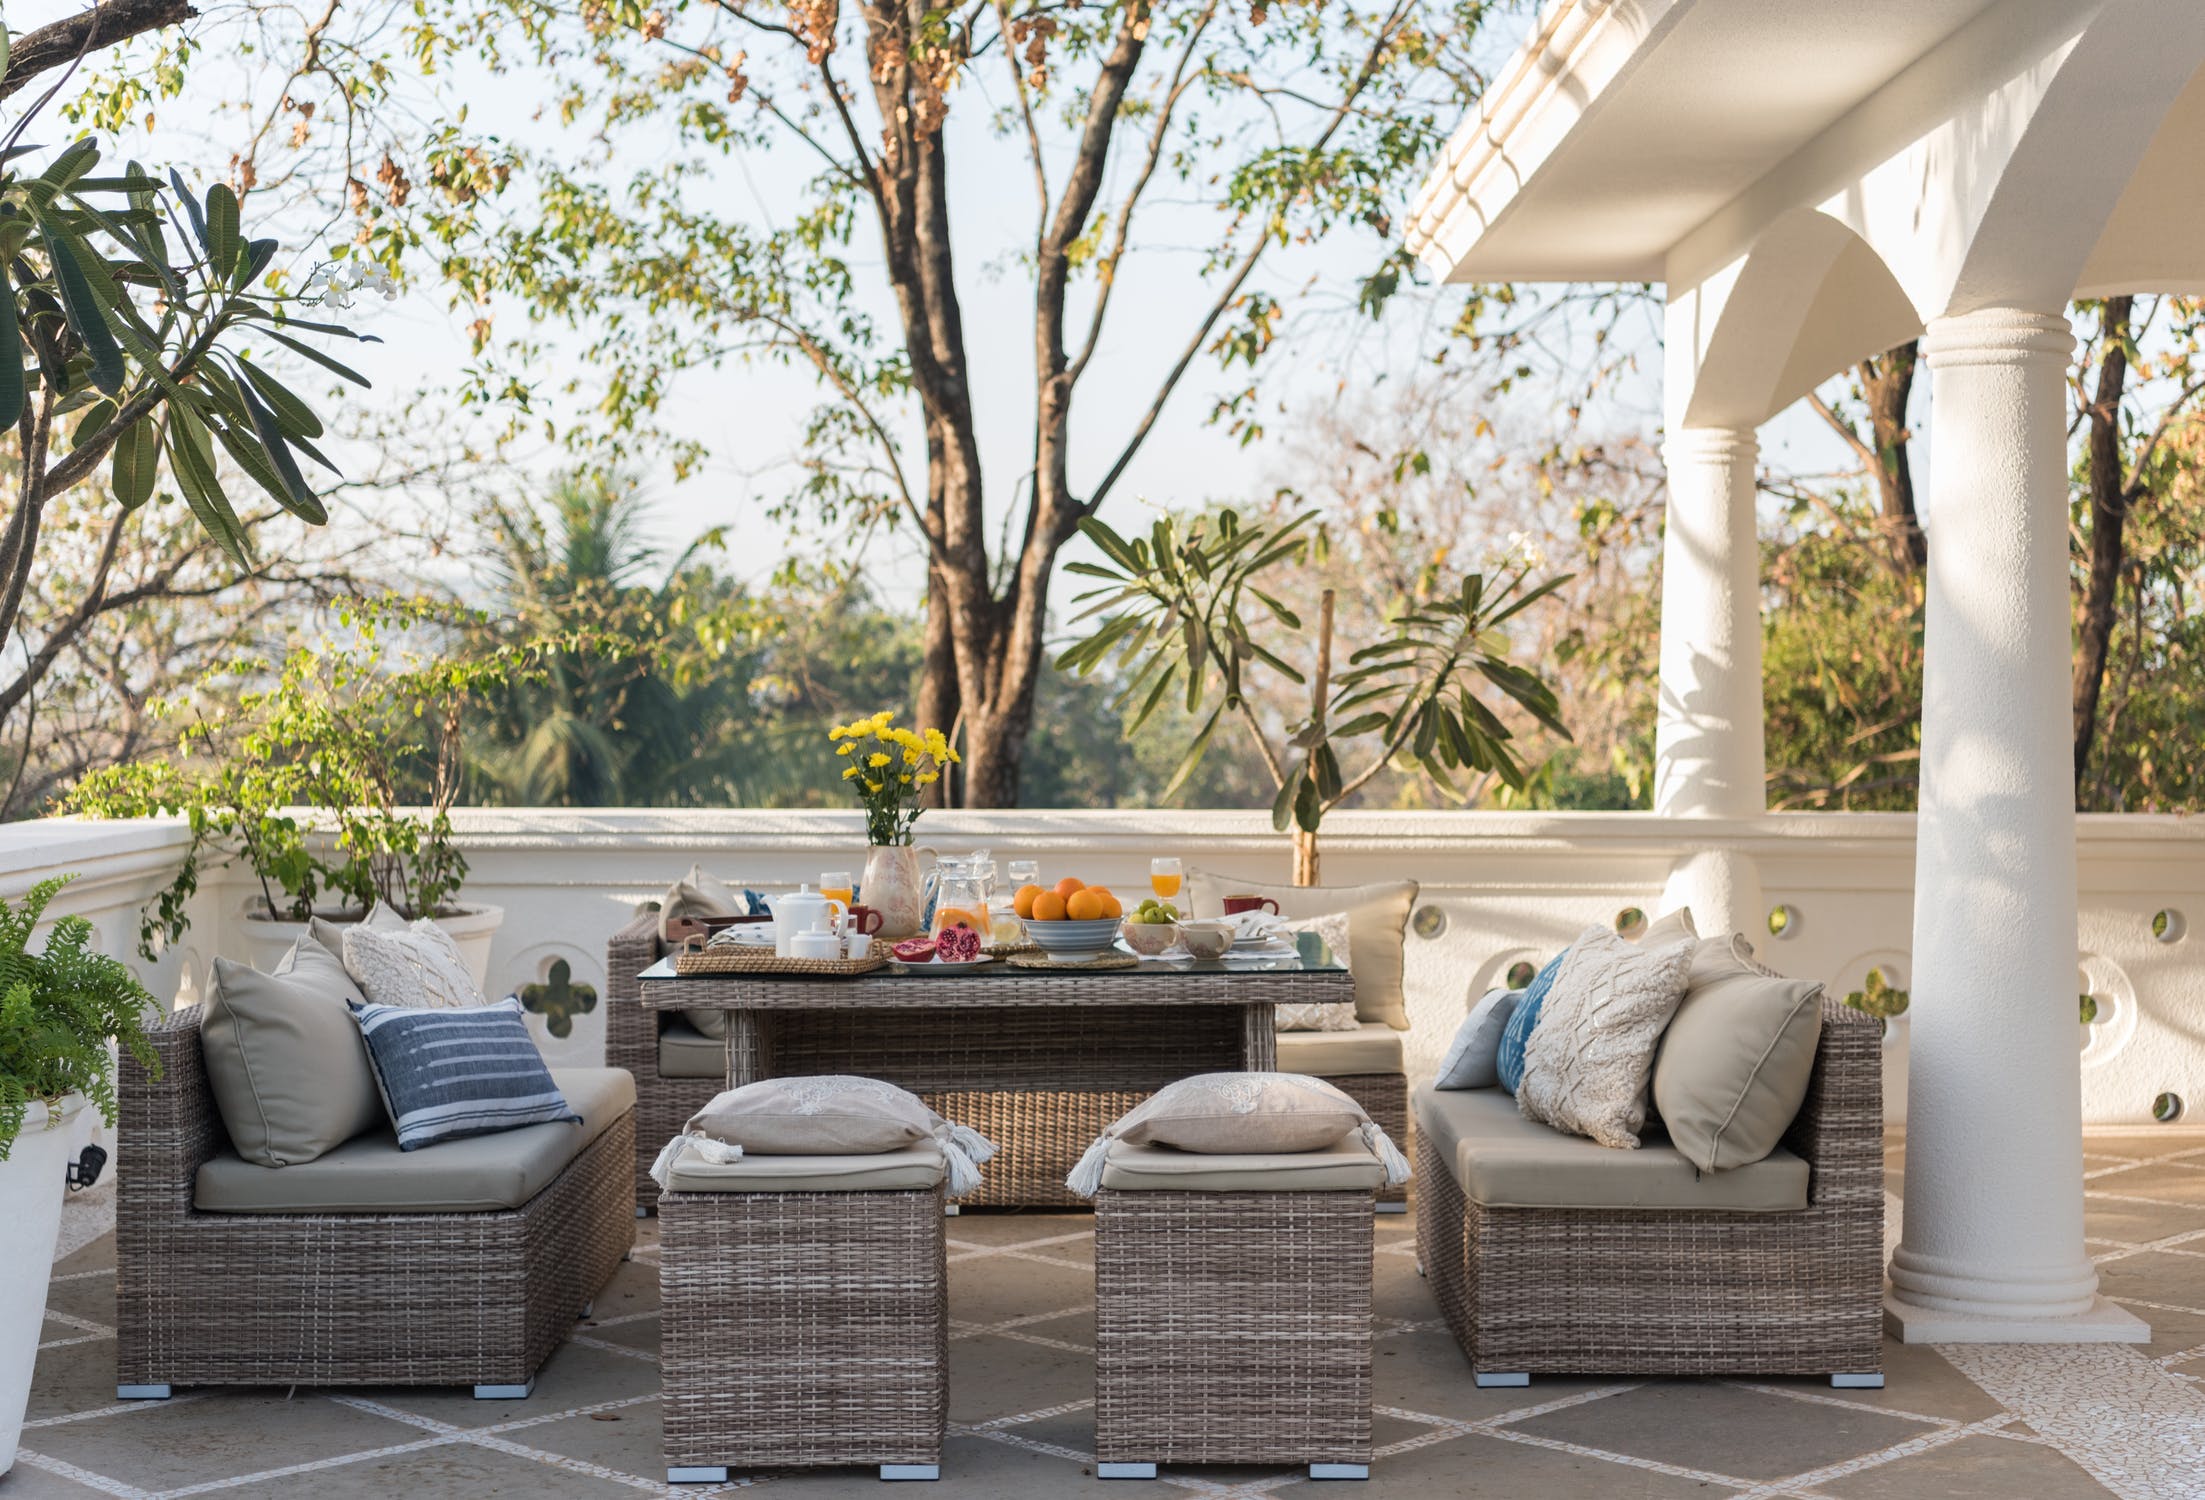 7 Ideas to Make Your Outdoor Living Space Irresistible